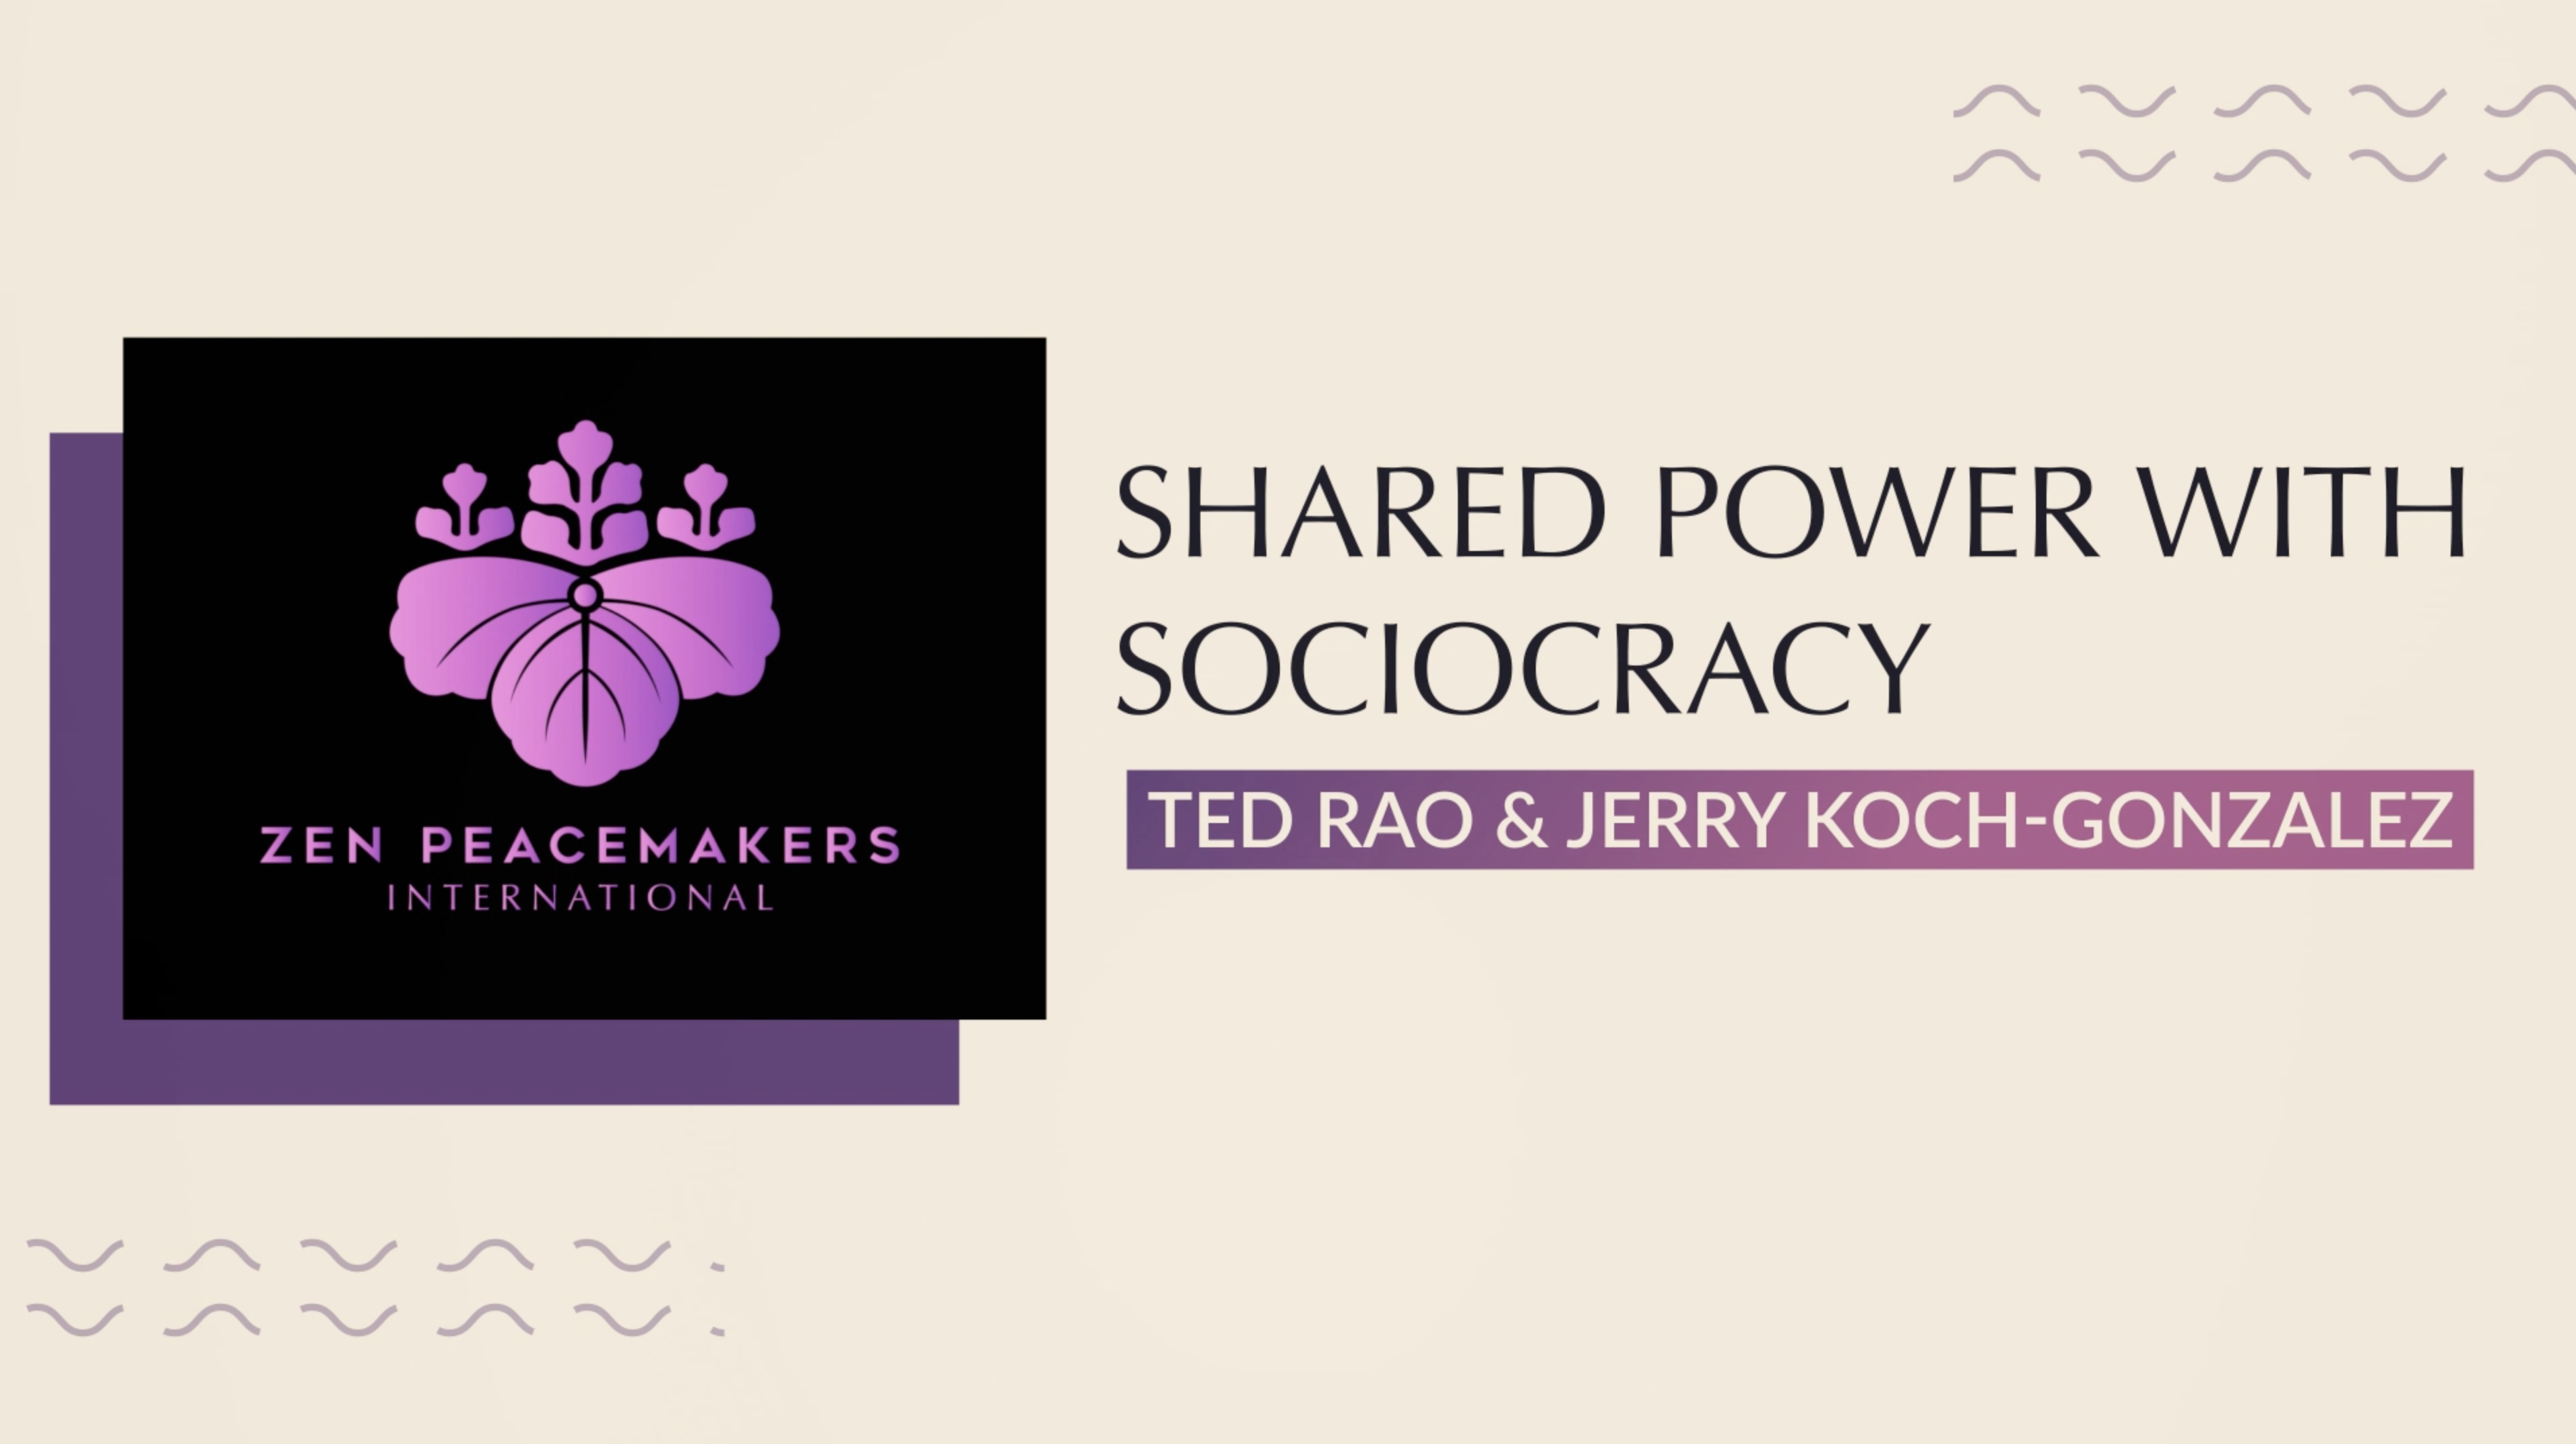 Shared Power with Sociocracy